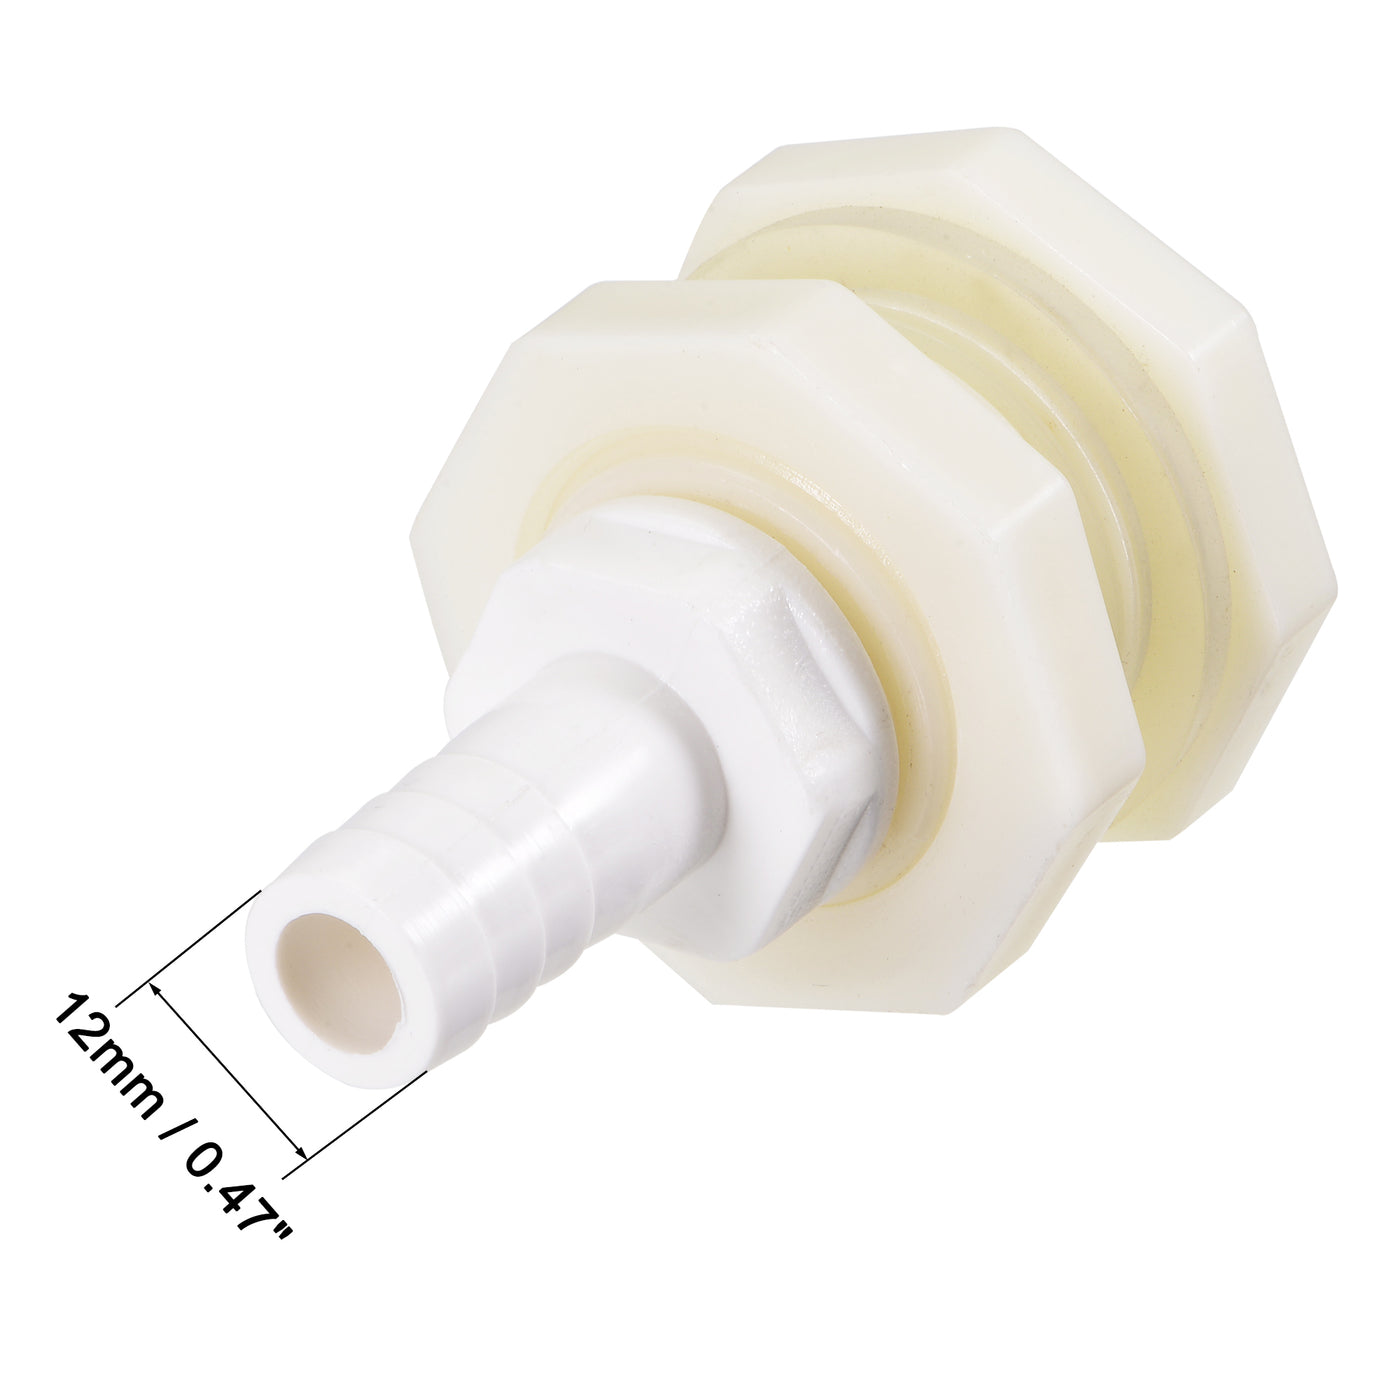 uxcell Uxcell Bulkhead Fitting Adapter 12mm Barbed x G1/2 Female ABS White for Aquariums, Water Tanks, Tubs, Pools 4Pcs